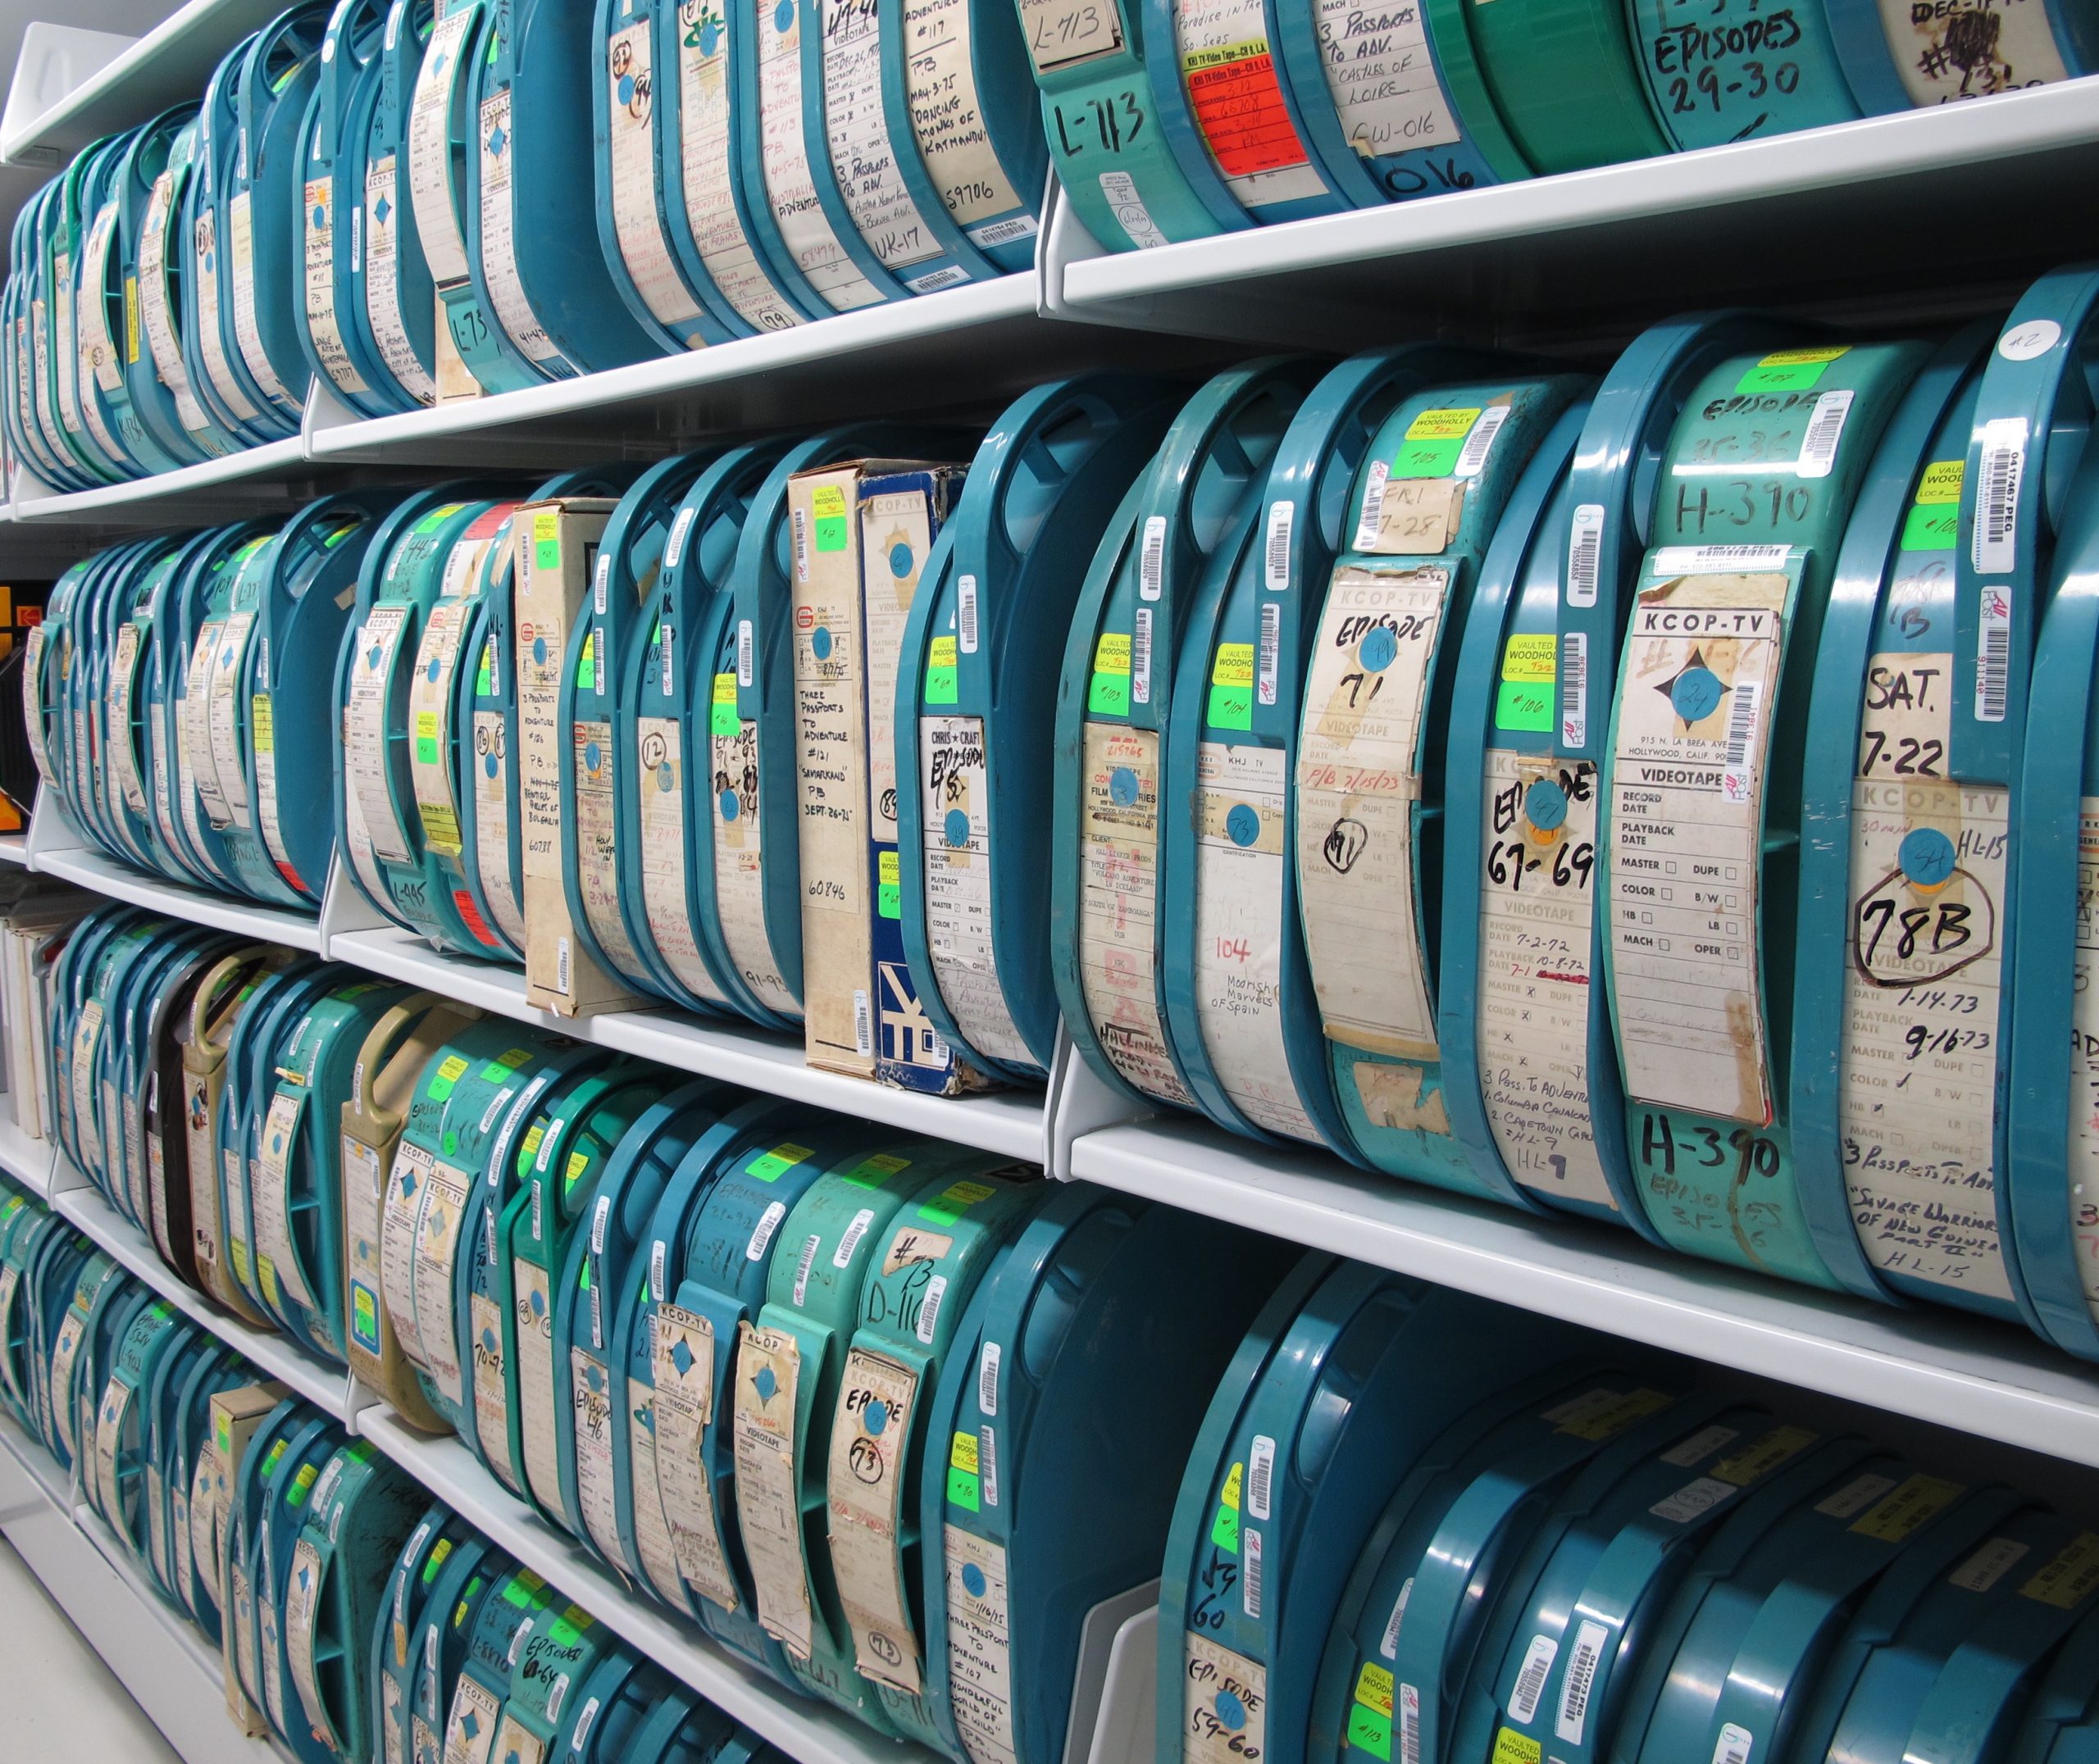 Blue plastic containers of Quadruplex videotape with varying labels and colored stickers sit on four rows of upright shelving.